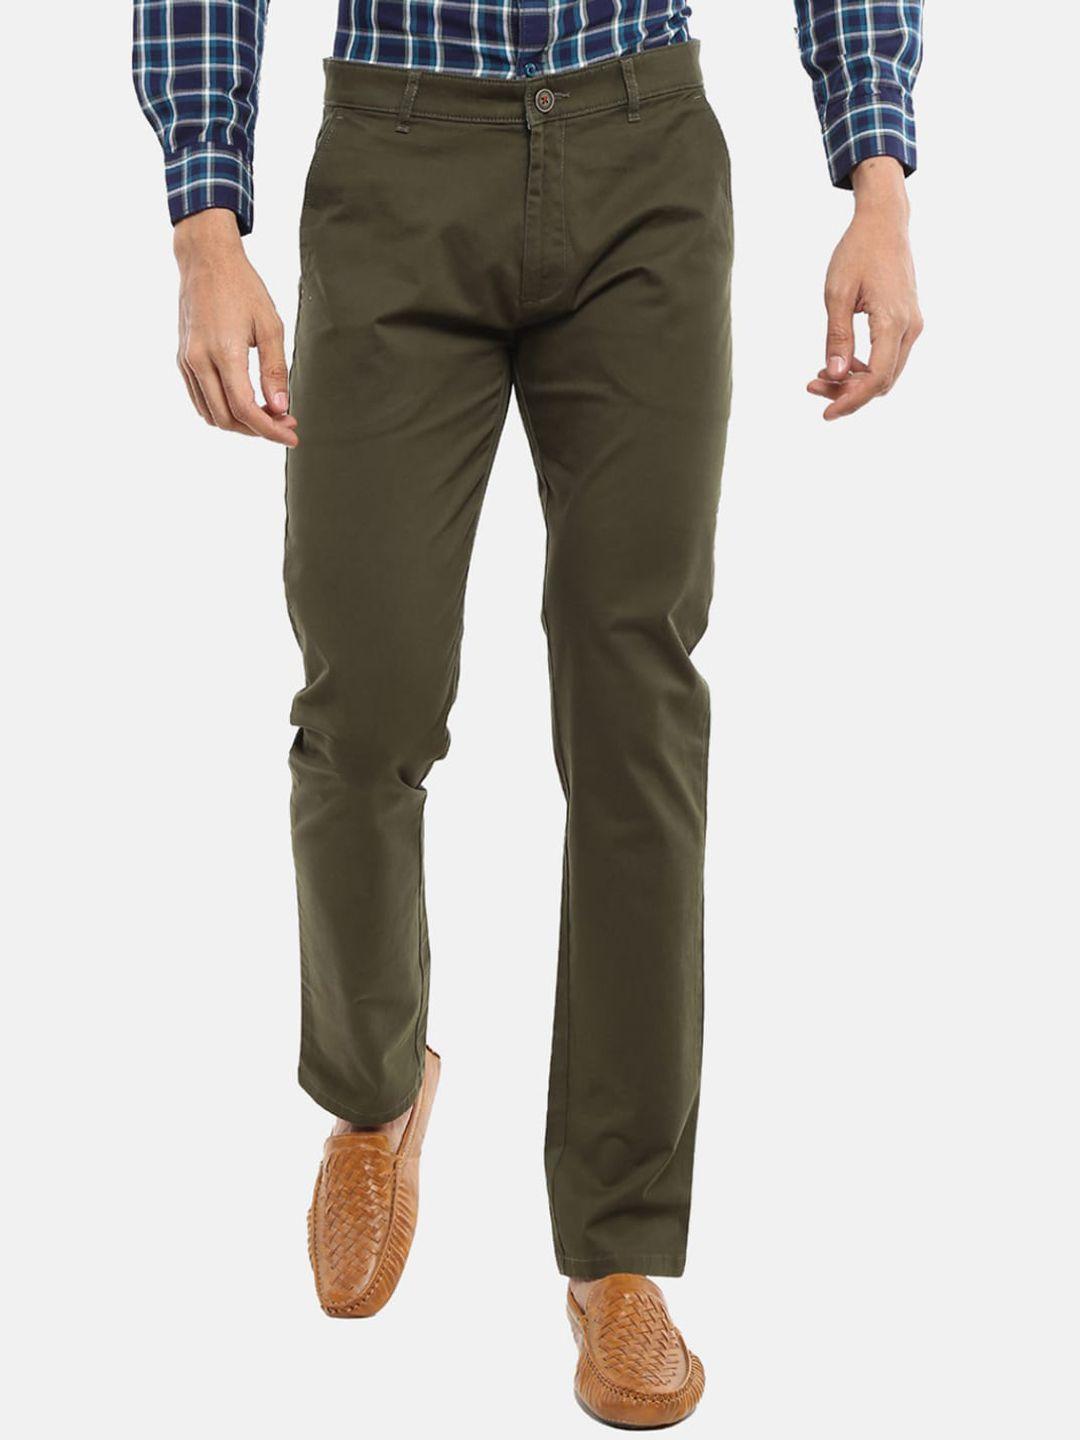 v-mart men olive green slim fit easy wash cotton chinos trousers